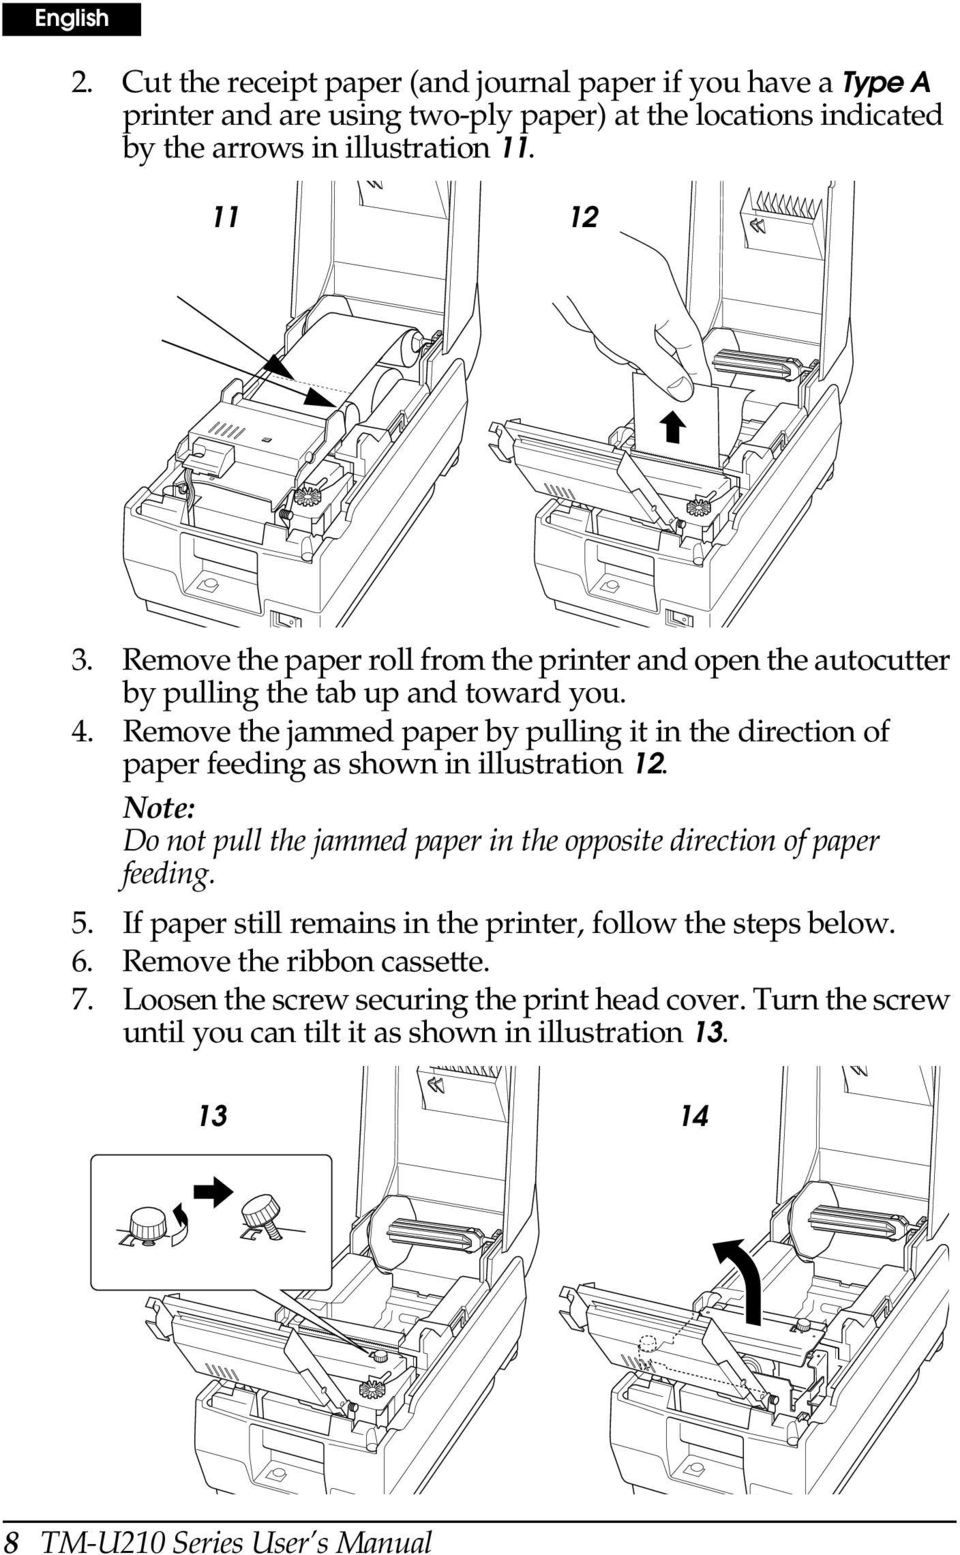 Remove the jammed paper by pulling it in the direction of paper feeding as shown in illustration 12. Note: Do not pull the jammed paper in the opposite direction of paper feeding.